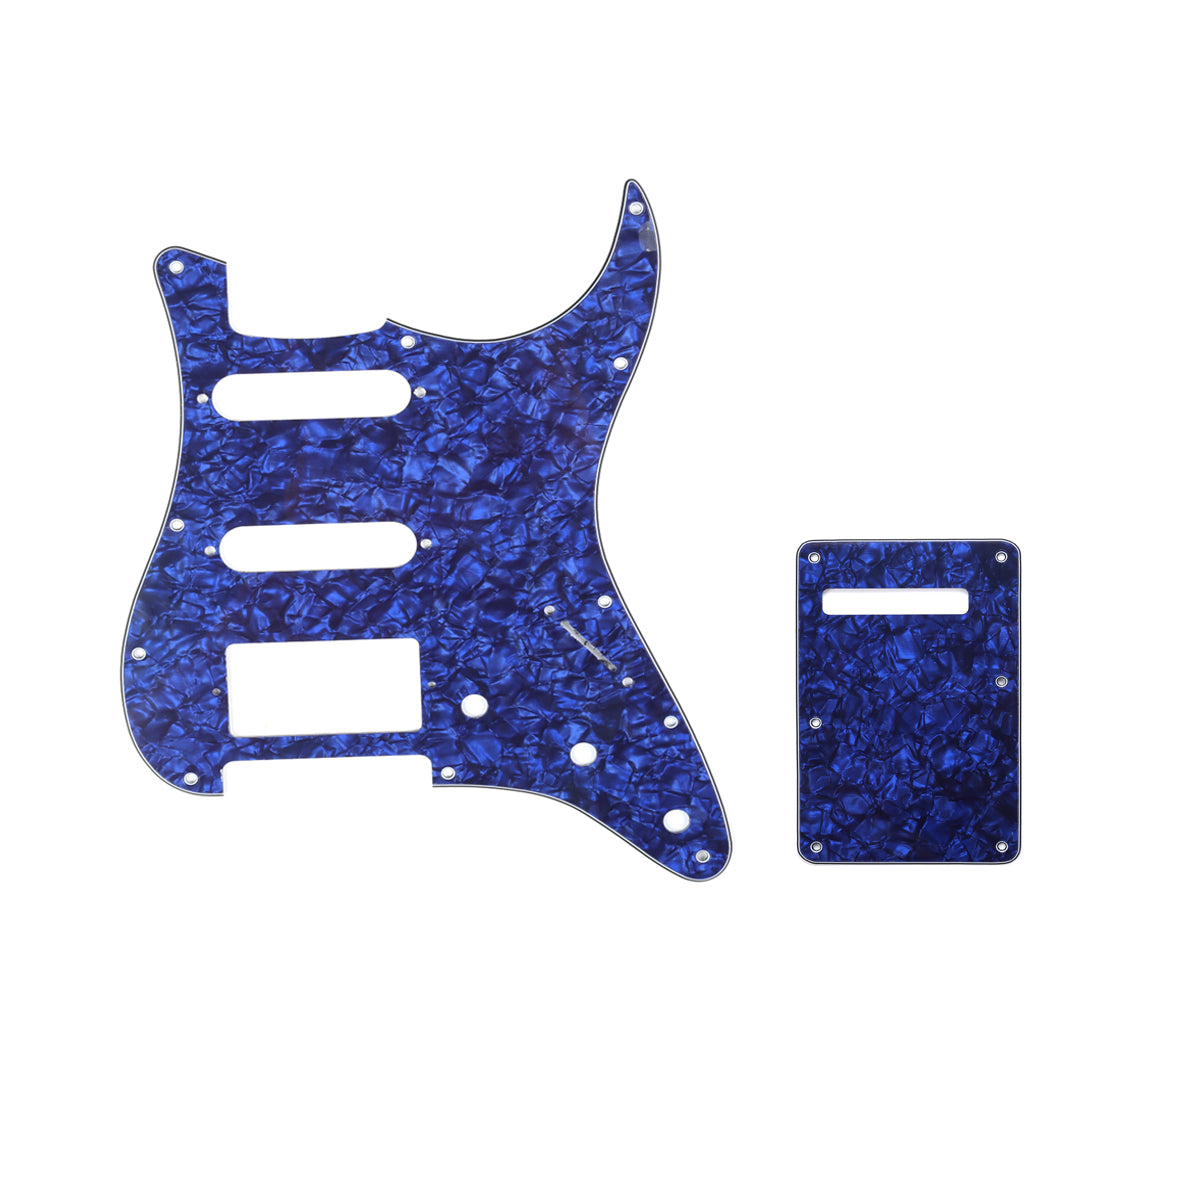 Musiclily SSH 11 Hole Strat Guitar Pickguard and BackPlate Set for Fender USA/Mexican Standard Stratocaster Modern Style, 4Ply Blue Pearl